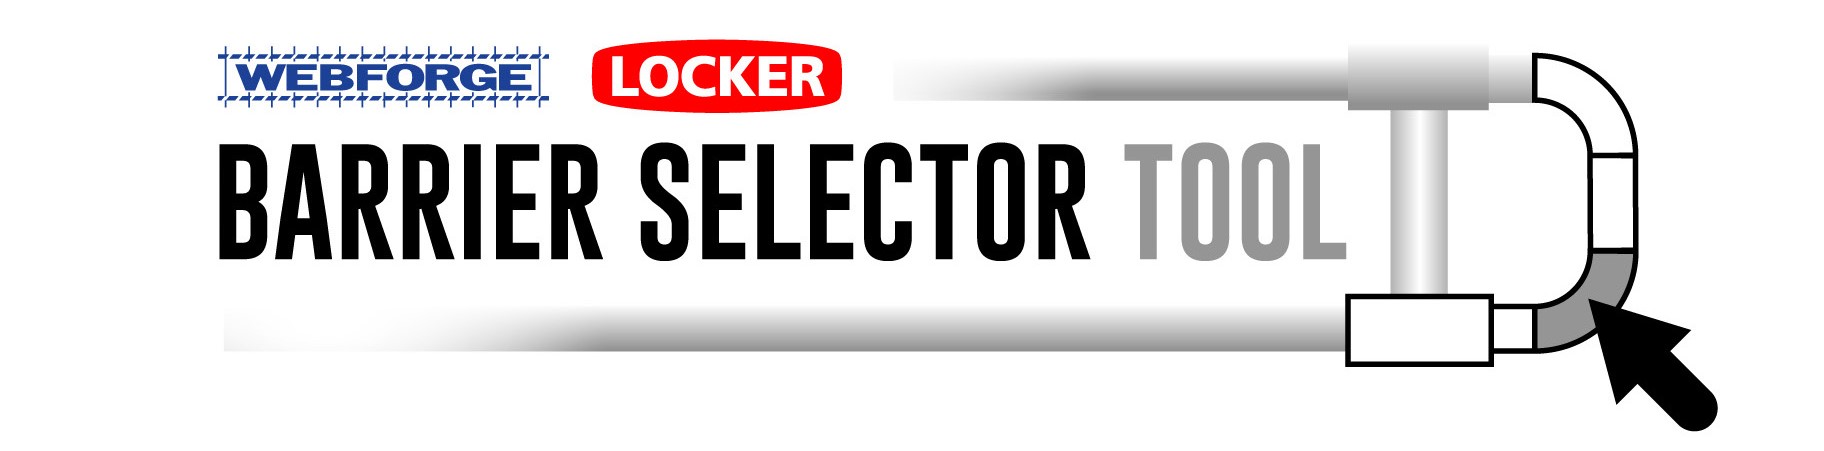 BARRIER SELECTOR TOOL GRAPHIC 1